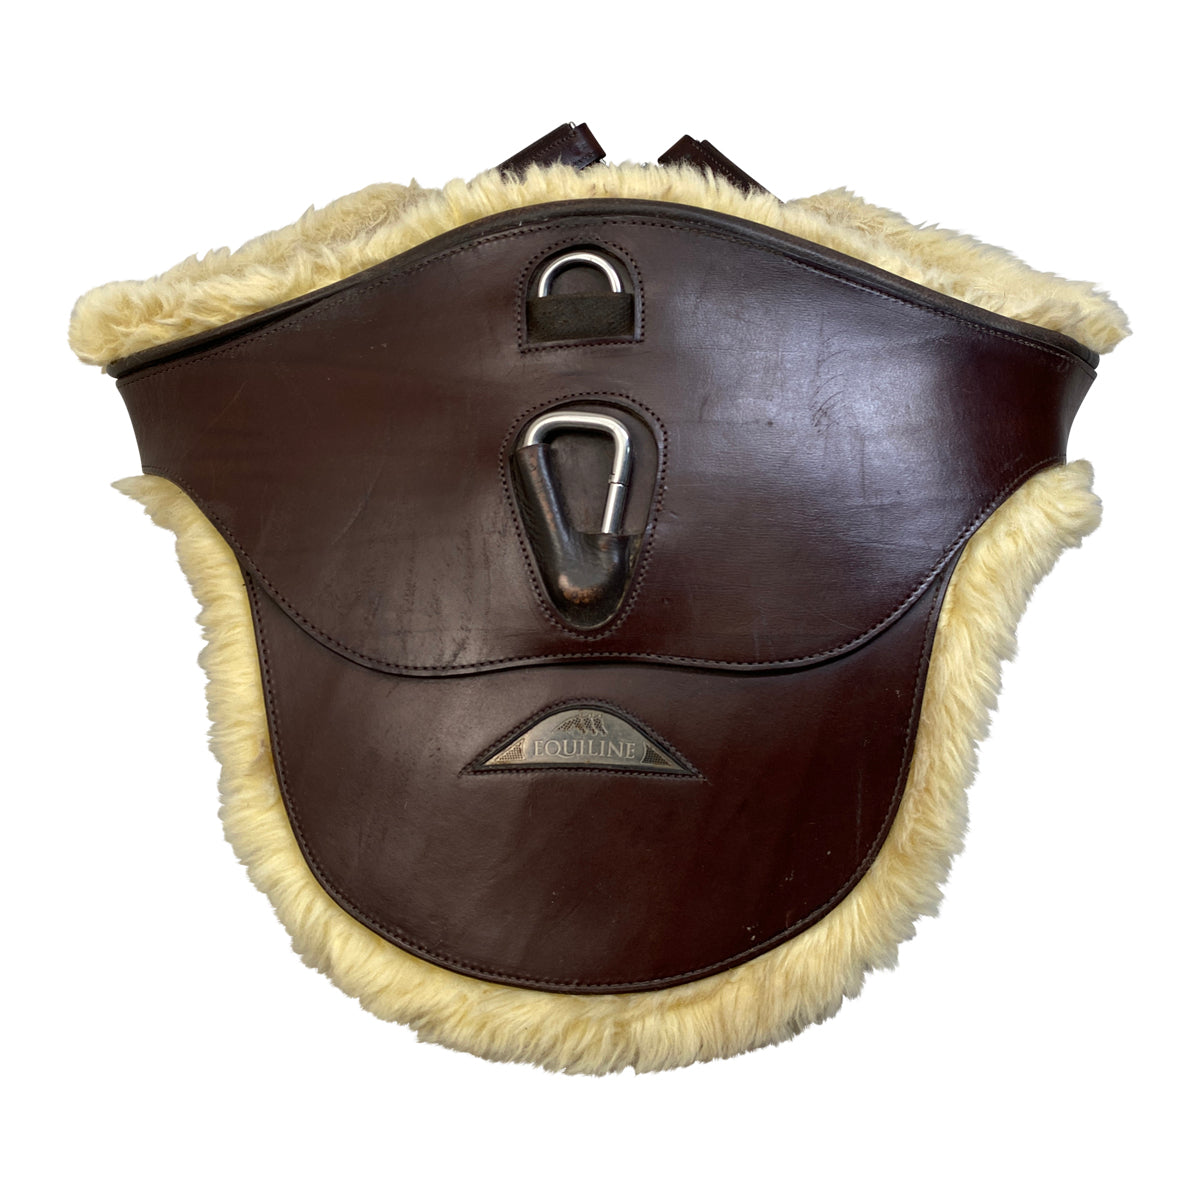 Equiline Belly Guard w/Sheepskin Lining in Brown/Tan